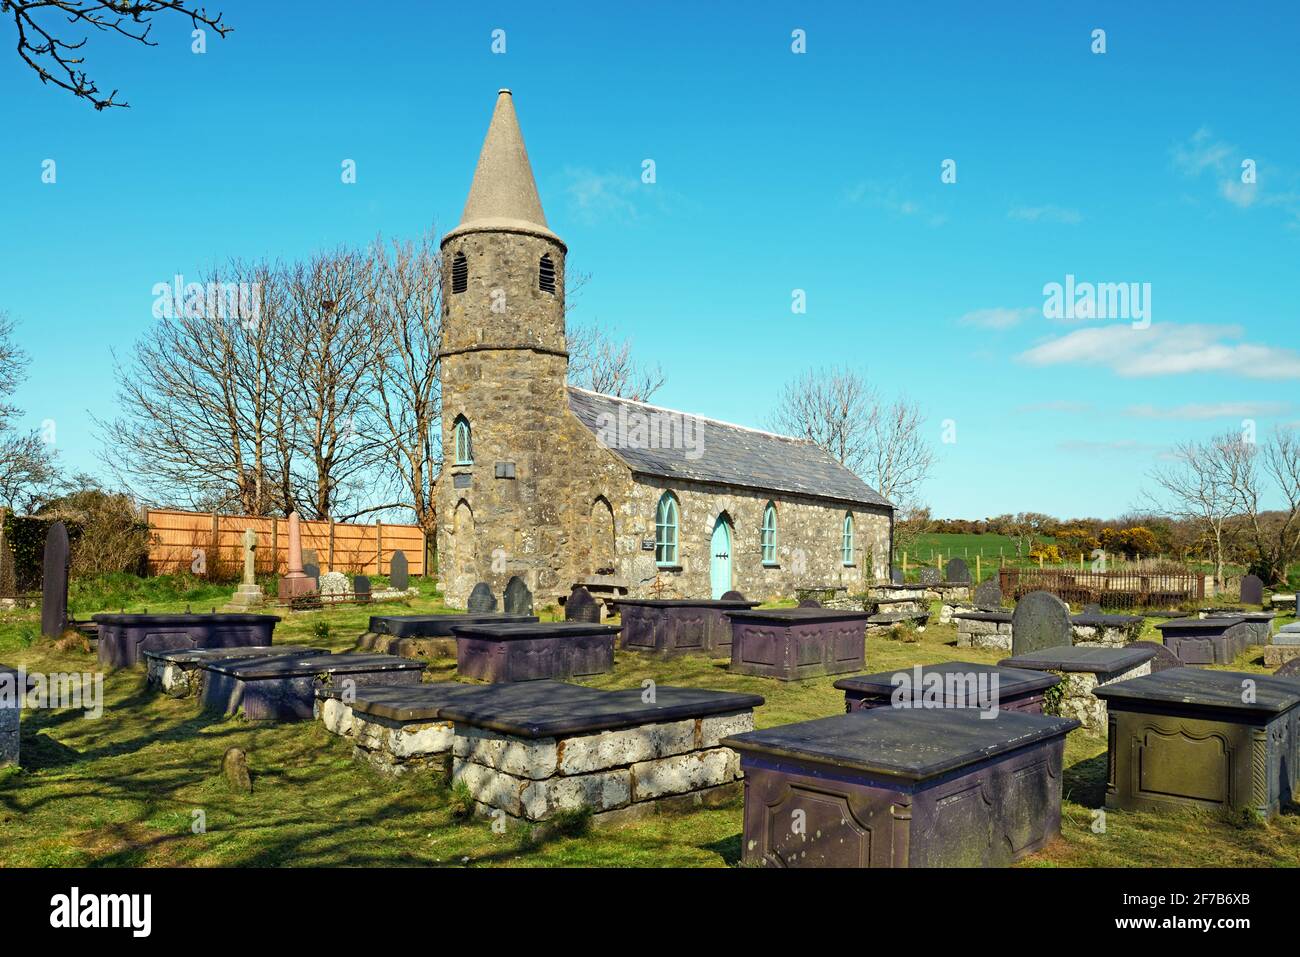 Church of St Gwynin in Llandegwning, North Wales, is a primitive Gothic style church that was rebuilt in 1840. It is now a Grade II listed building. Stock Photo